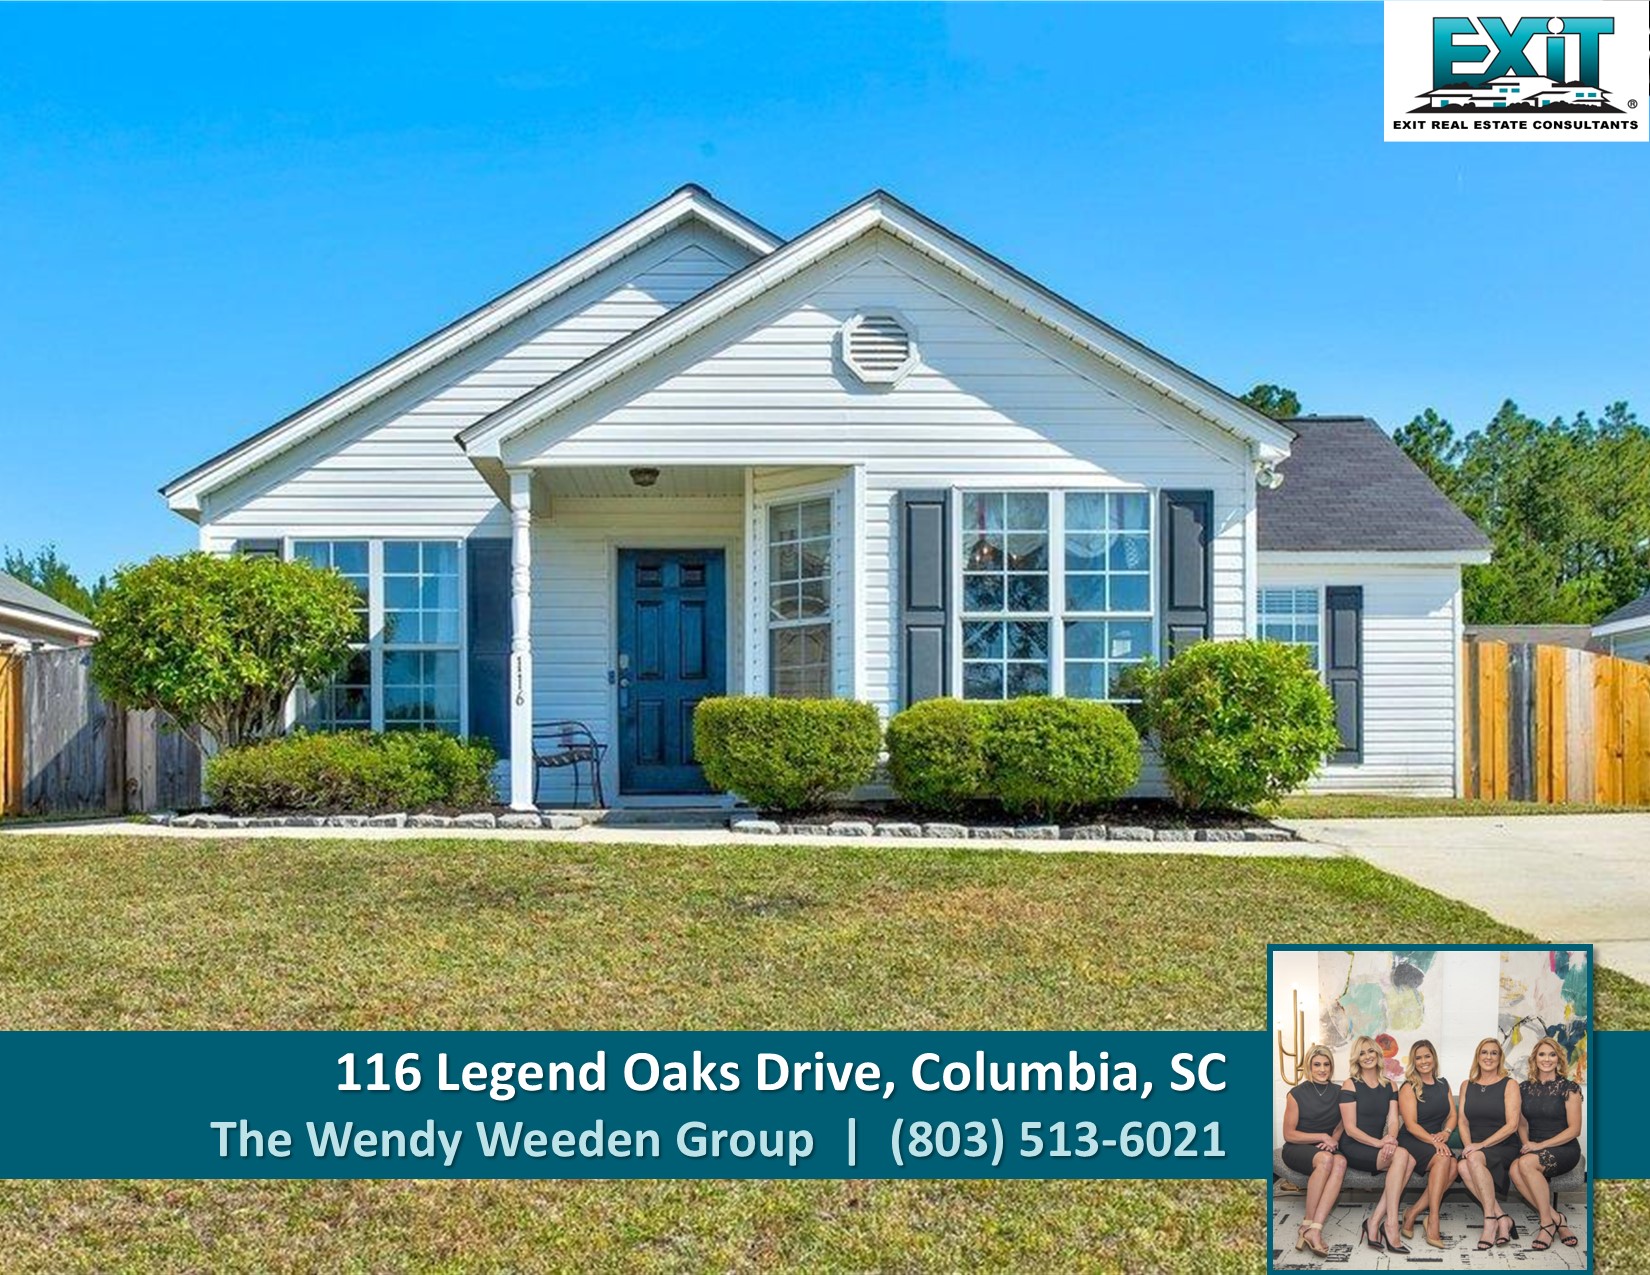 Just listed in Legend Oaks